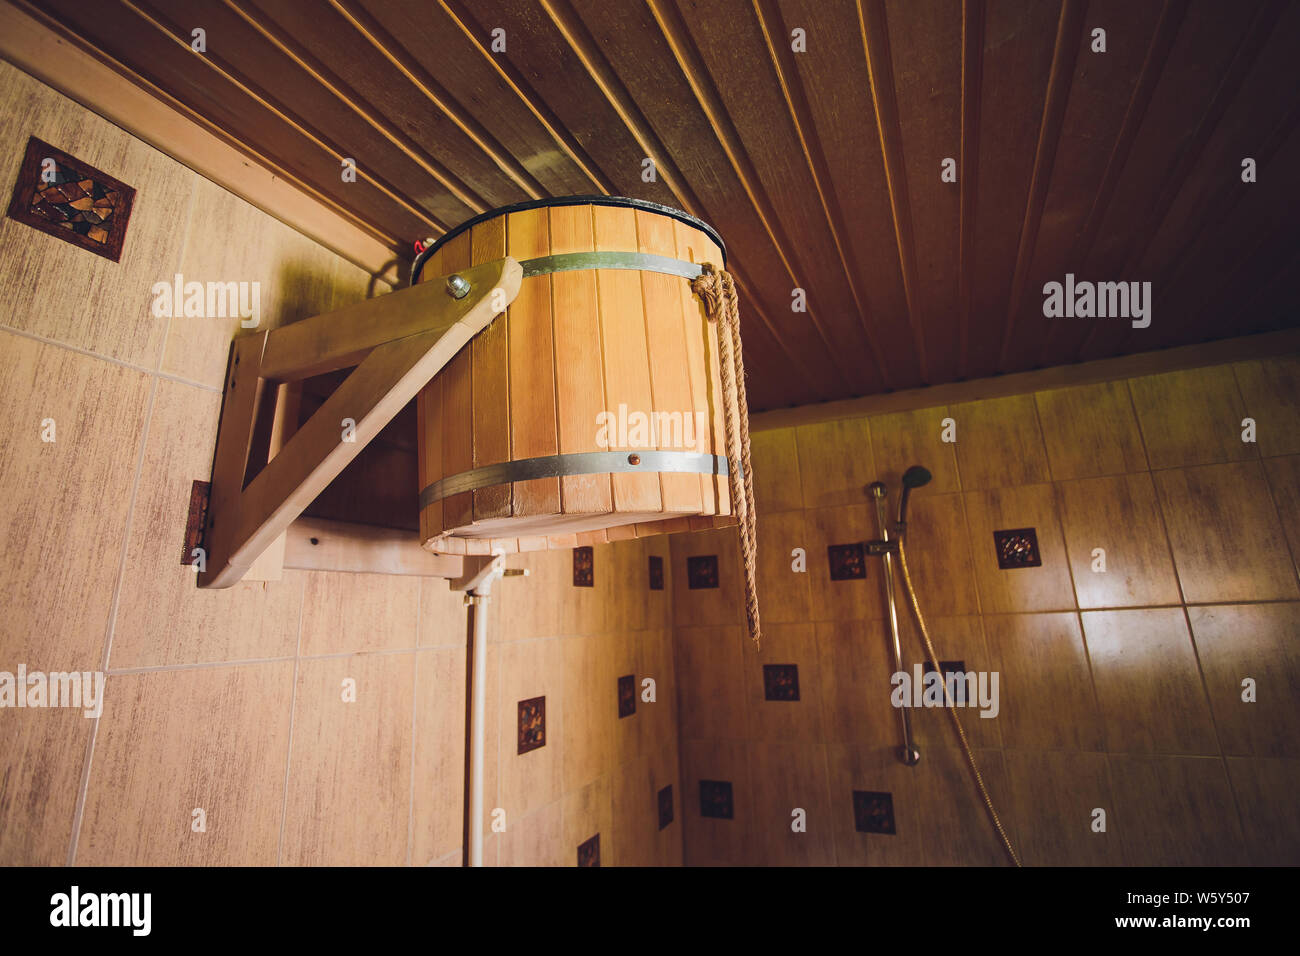 Part of the interior of the Russian bath and bath accessories. Bath accessories on the background of the log walls of the Russian bath. Stock Photo